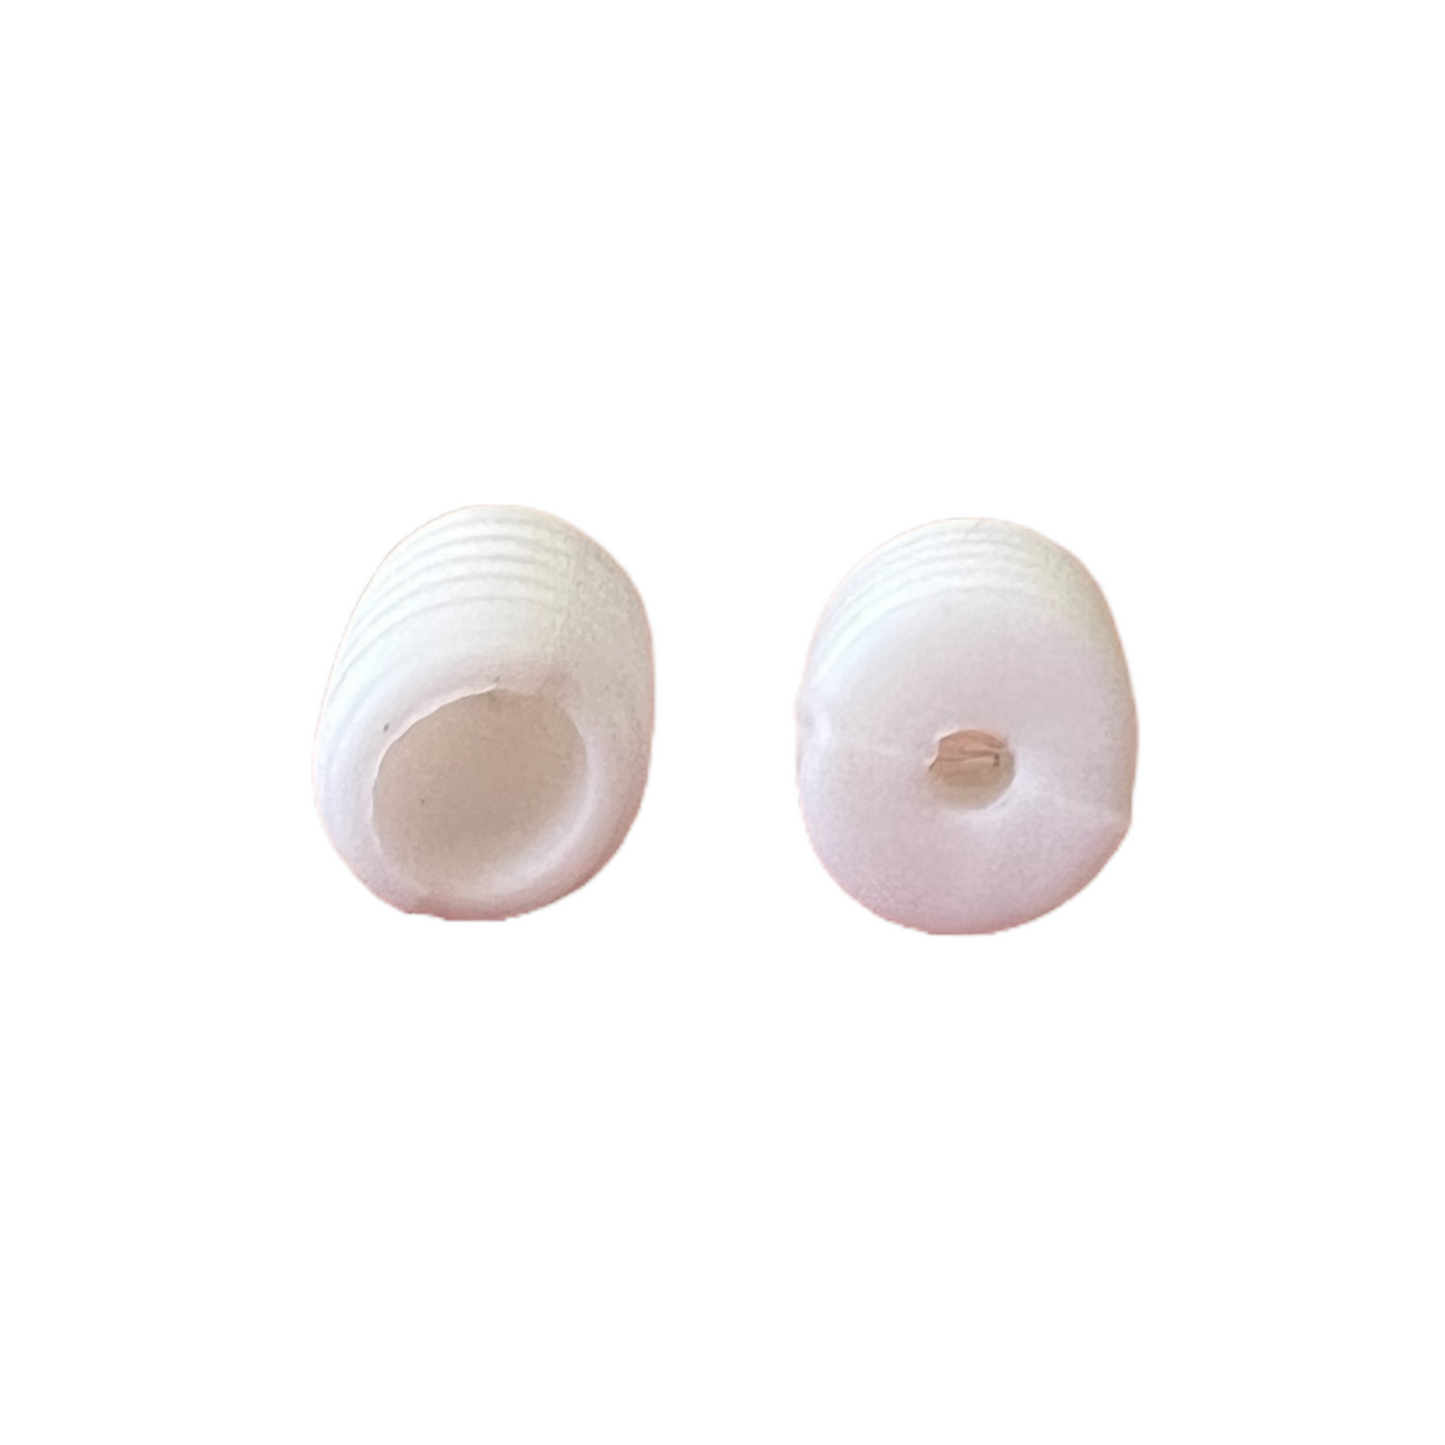 Silicone Toggle with Tool (for masks, elastic, etc)